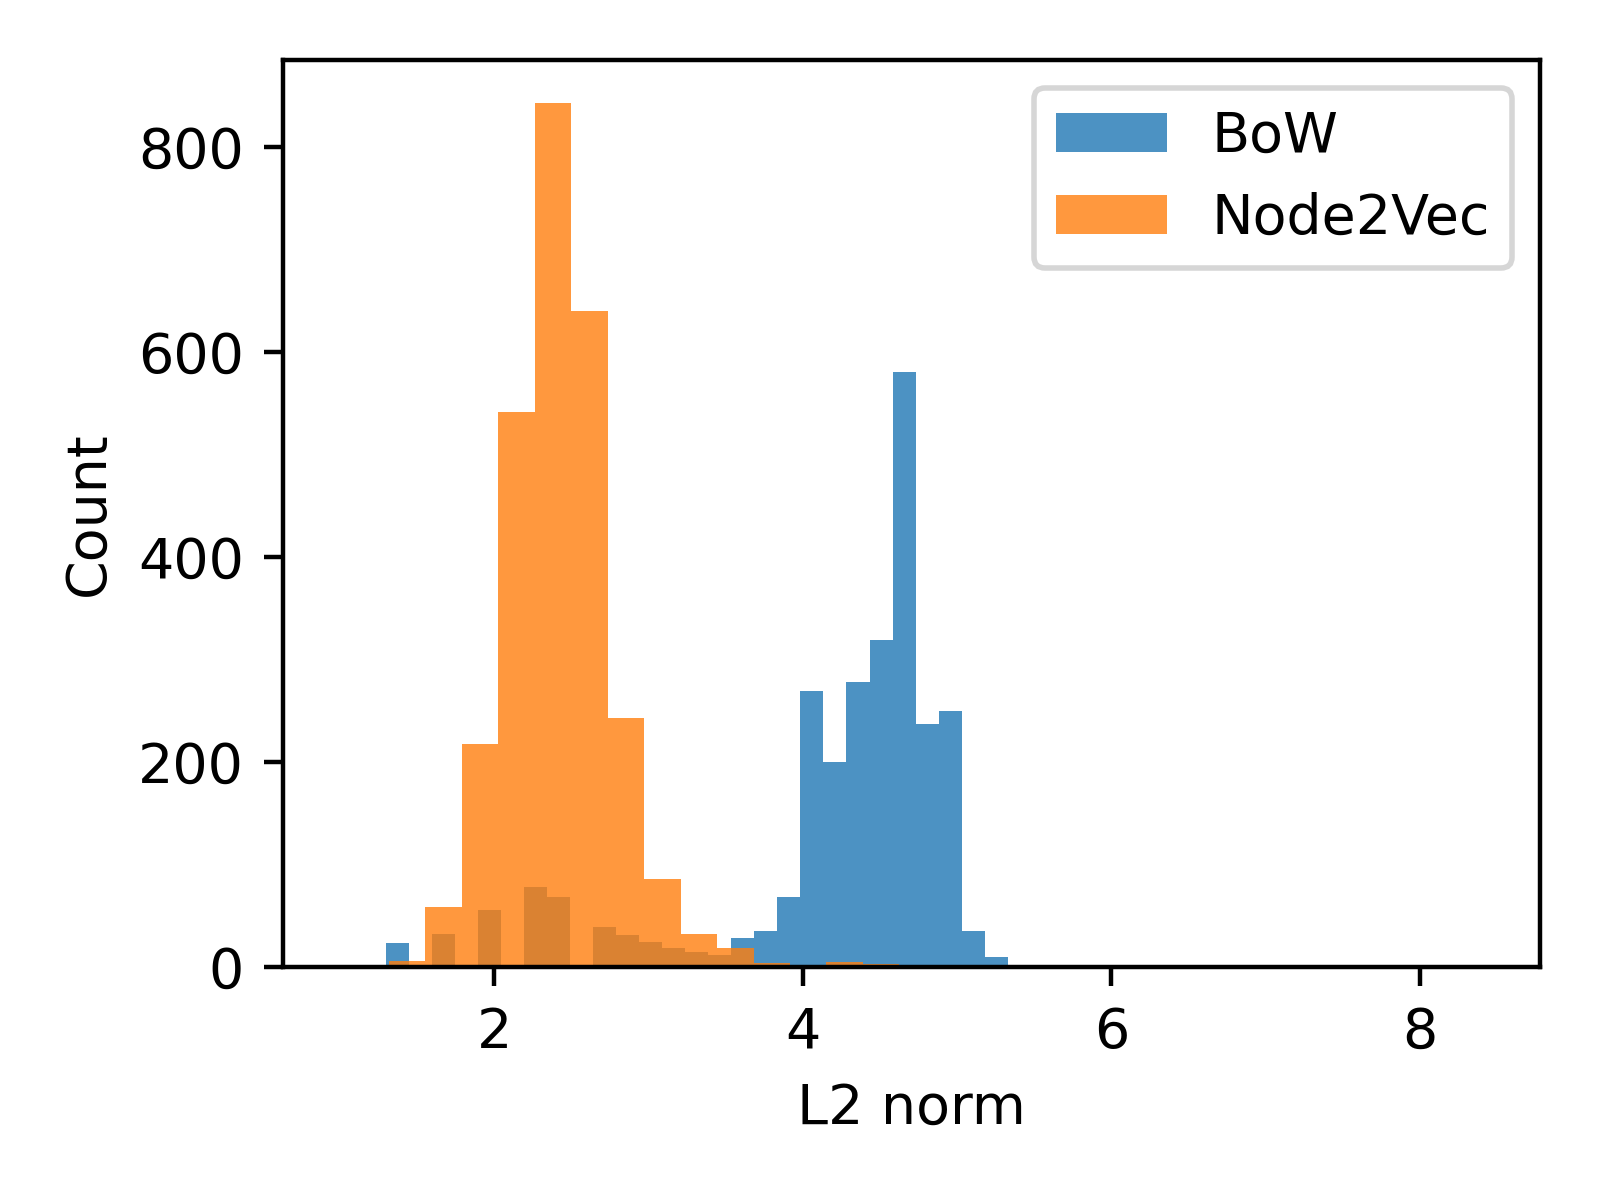 L2 norm distribution of text based and Node2Vec embeddings